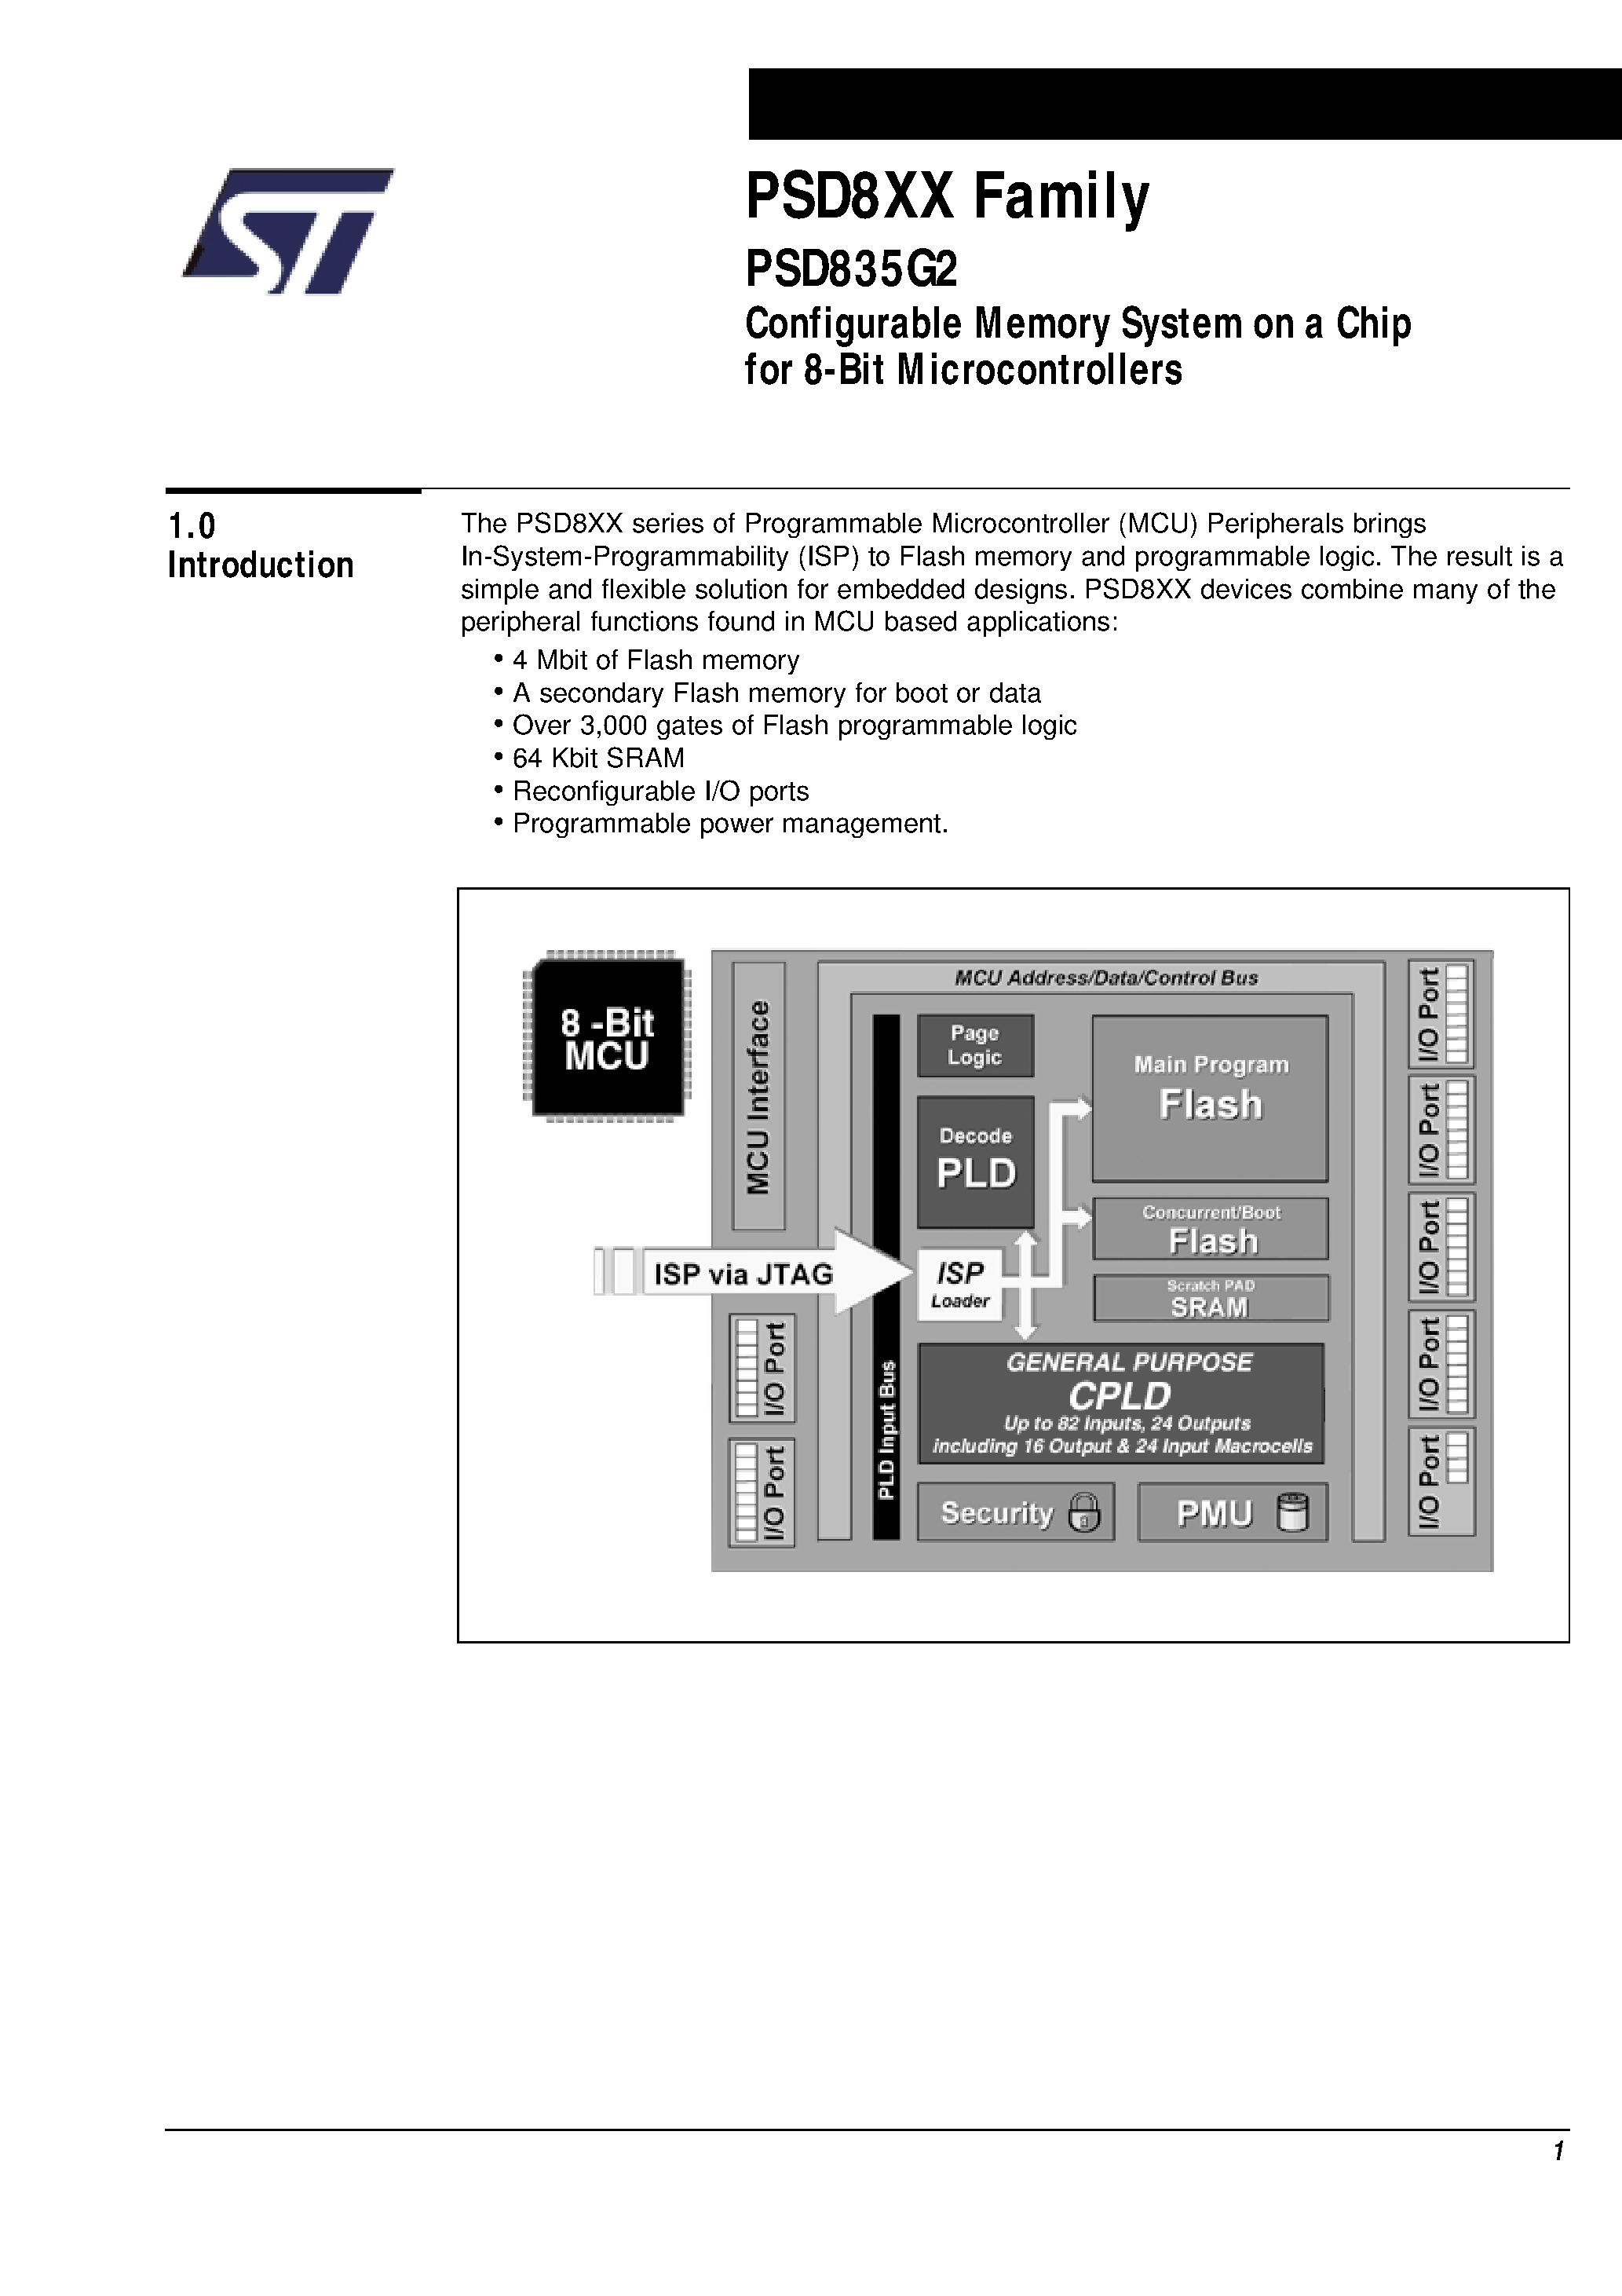 Datasheet PSD835F1-A-70B81 - Configurable Memory System on a Chip for 8-Bit Microcontrollers page 2